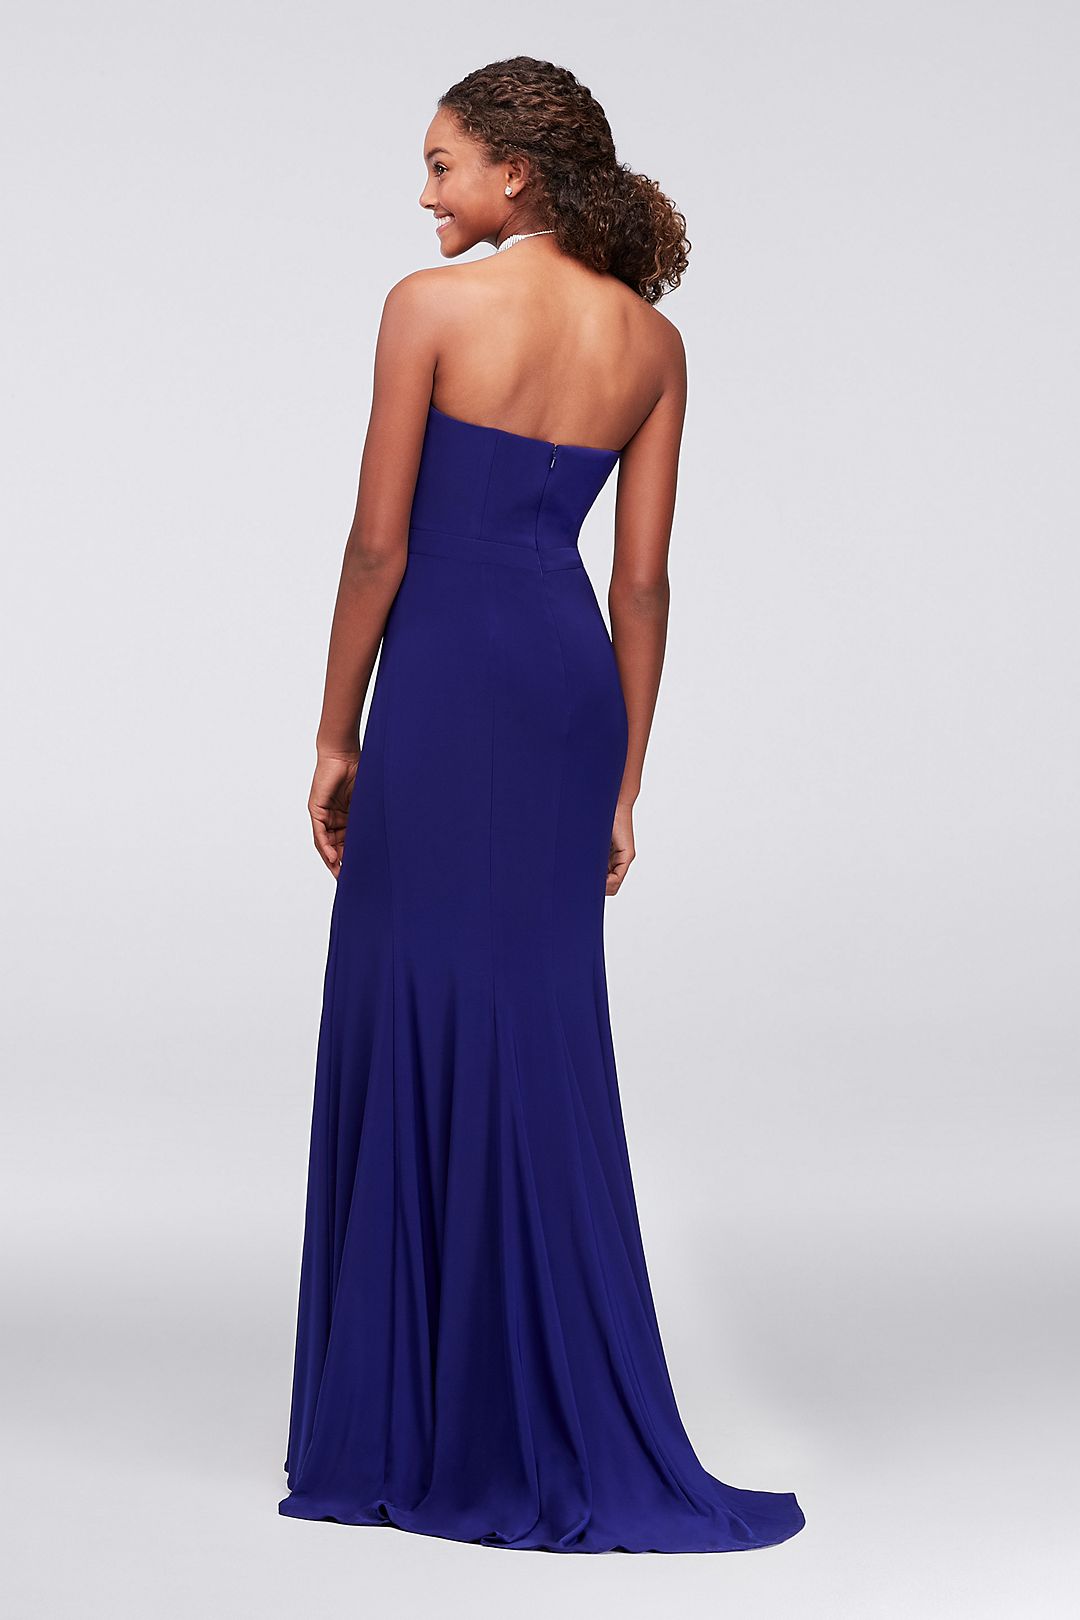 Strapless Sweetheart Plunge Jersey Mermaid Gown  Image 2